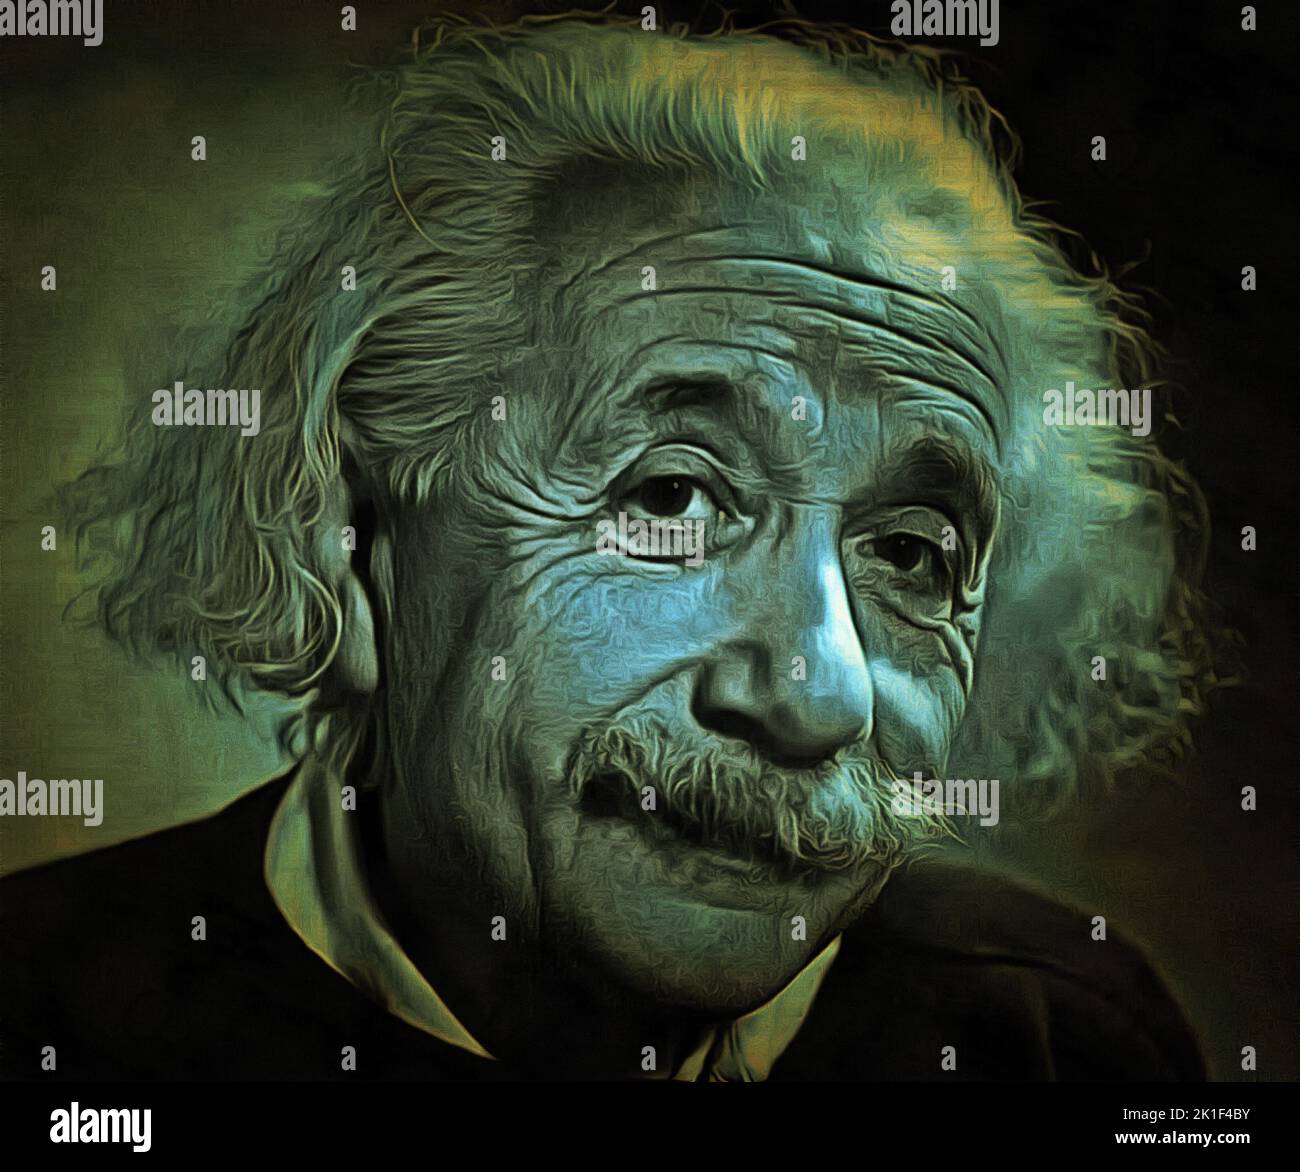 Illustrations portret Albert Einstein is a theoretical physicist, founders of modern theoretical physics, Stock Photo